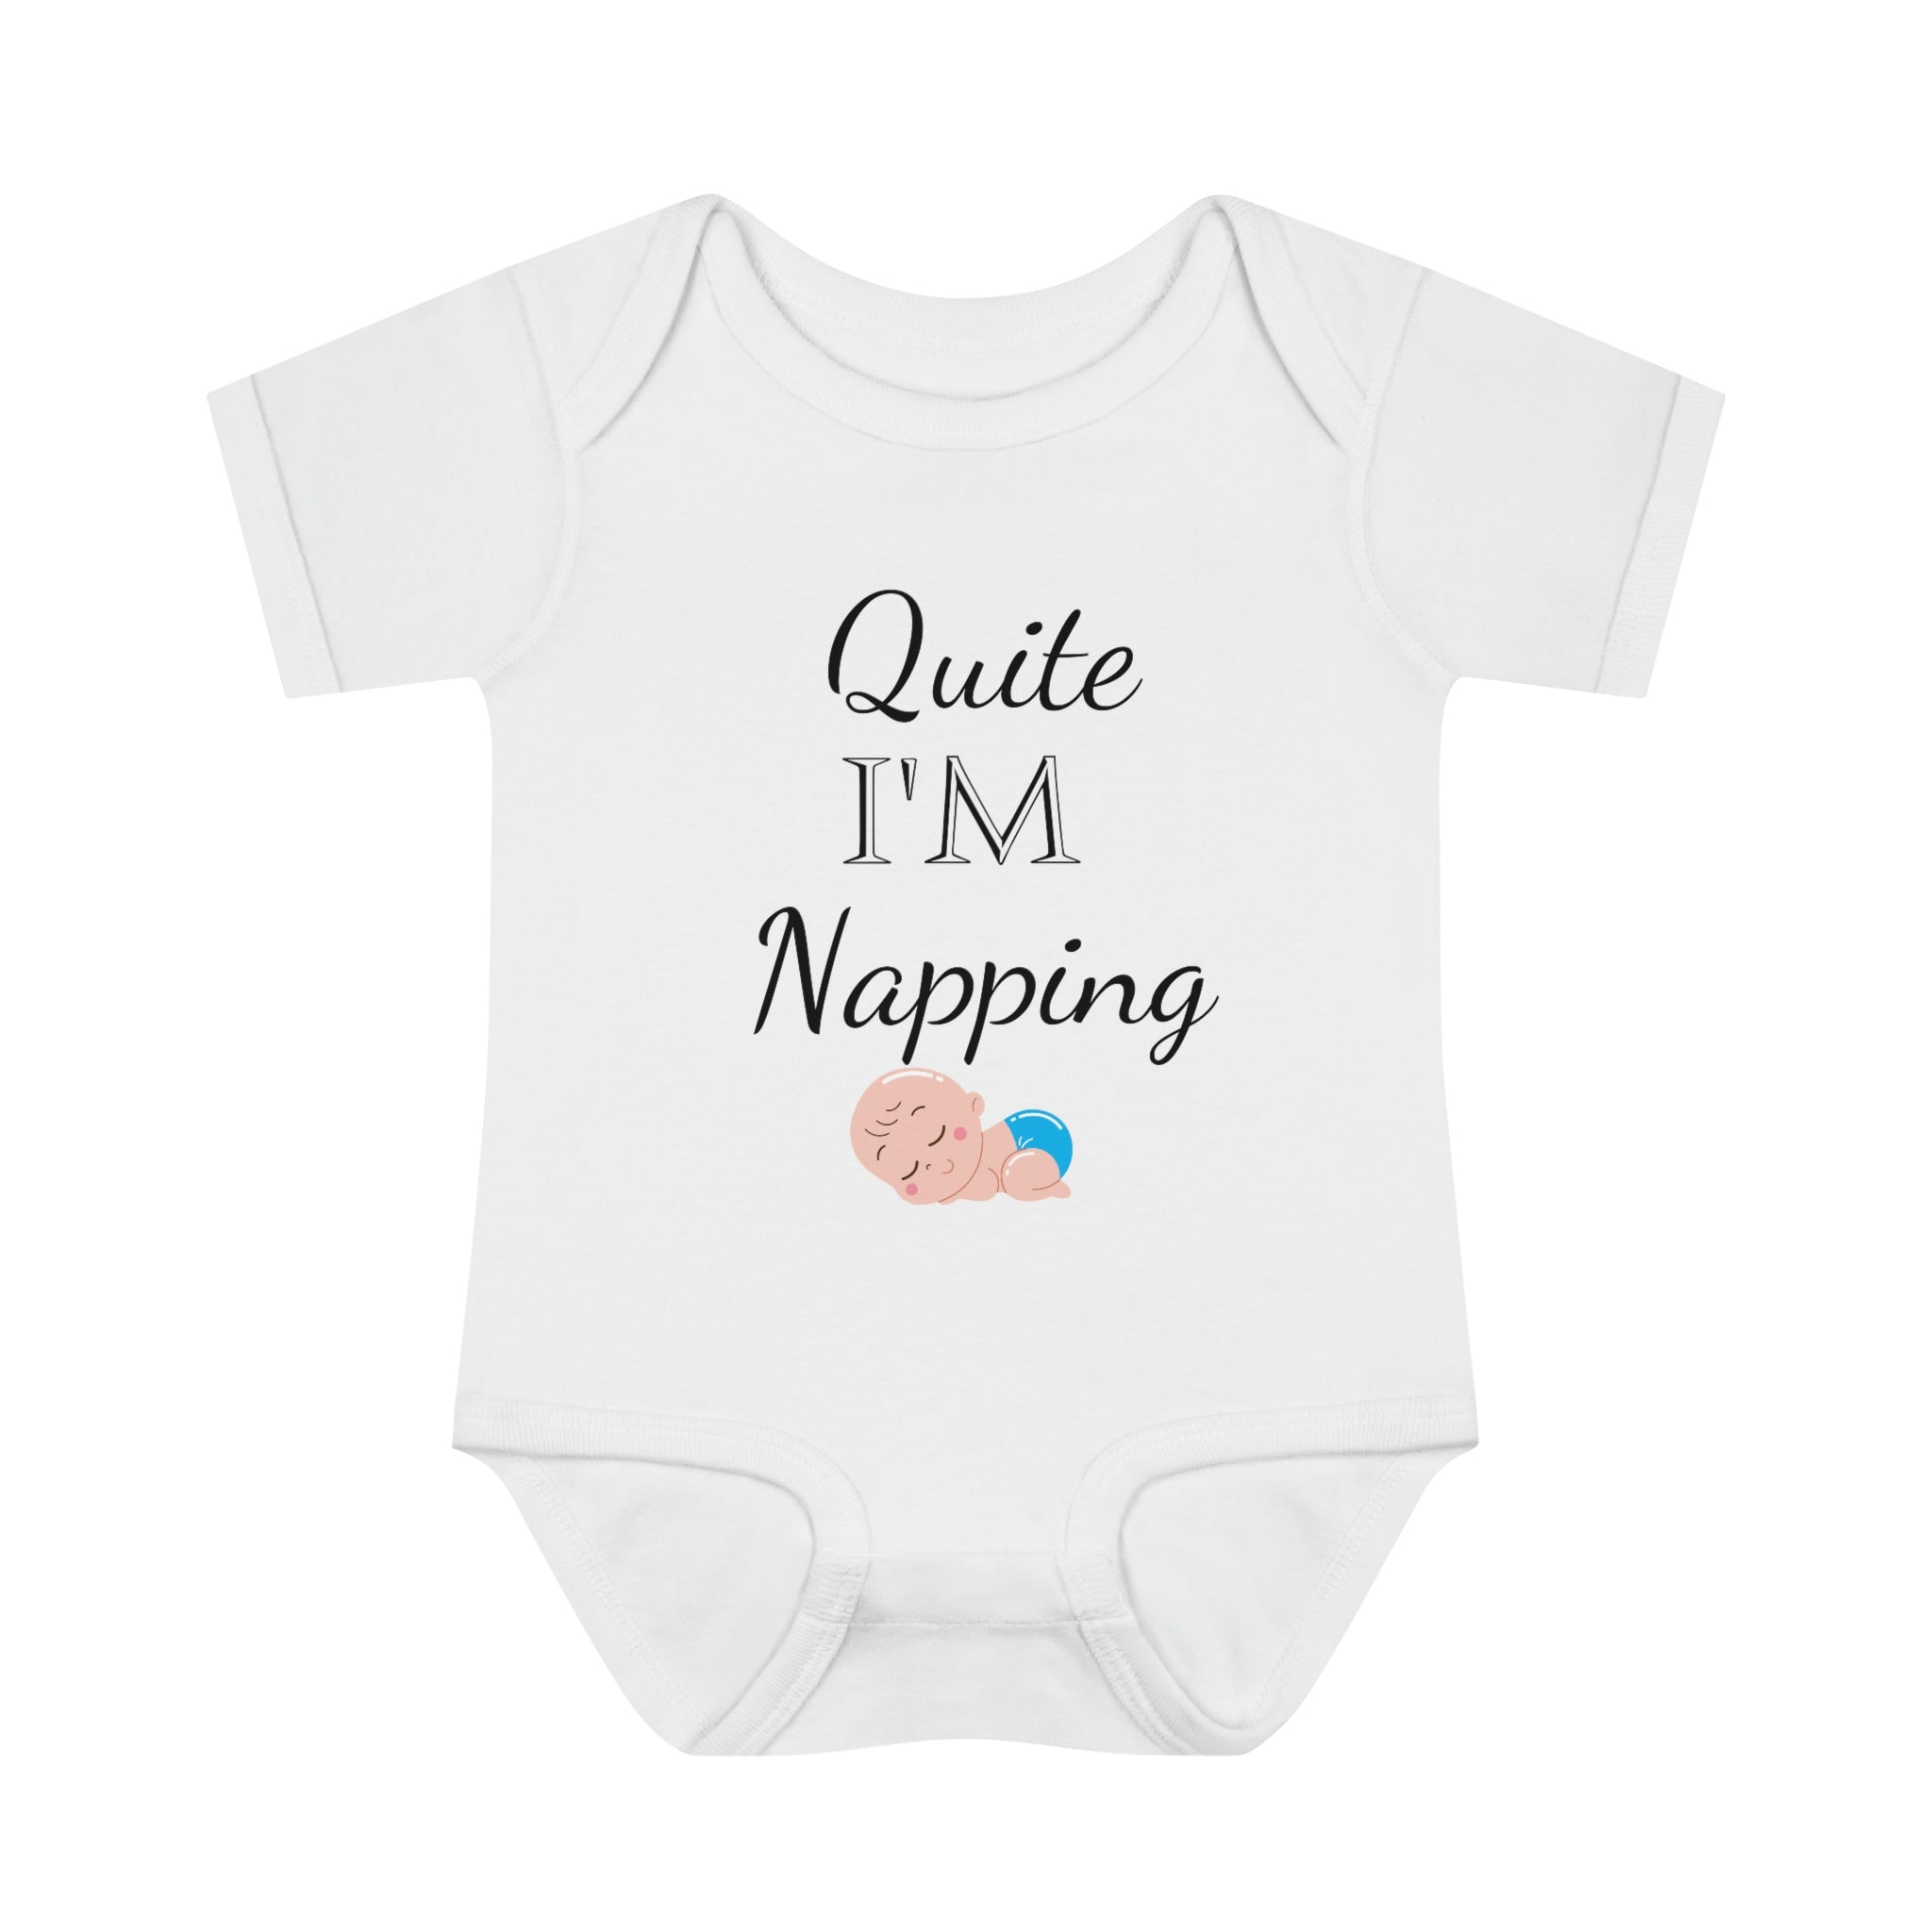 Quite I' am Napping Baby Bodysuit